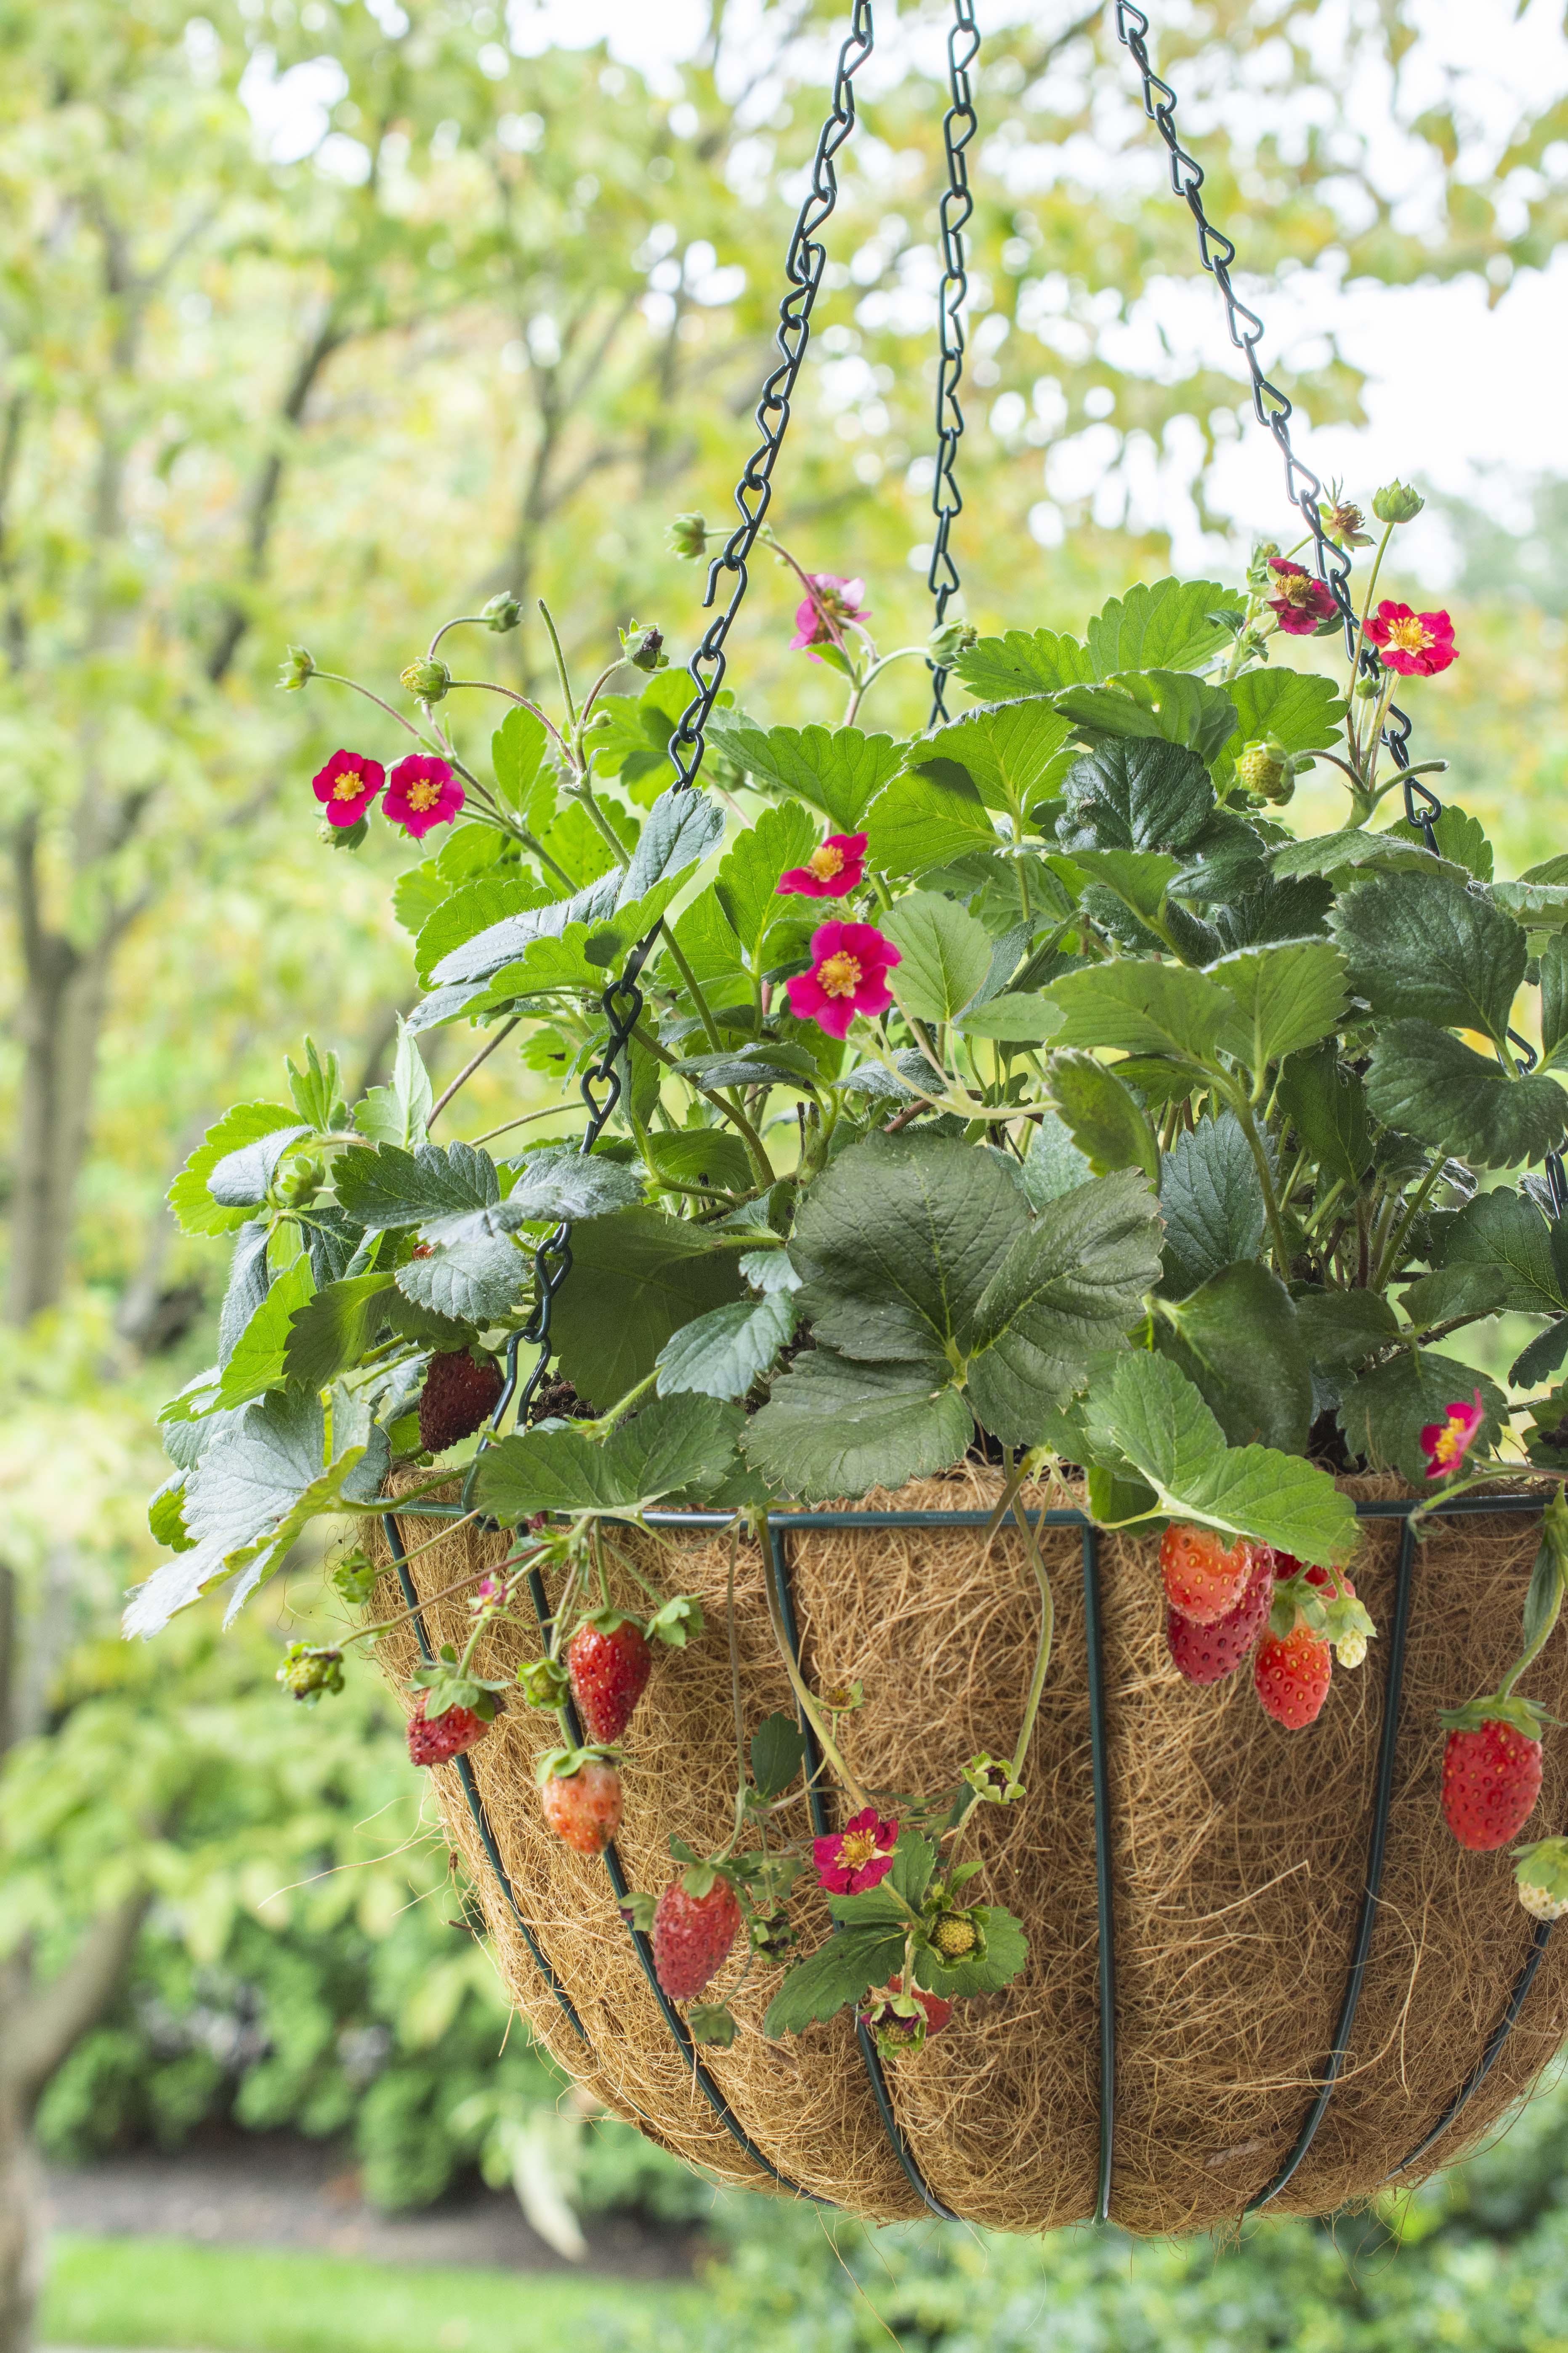 Scarlet Belle™ has scarlet red blooms with yellow centers that produce juicy strawberries all season.